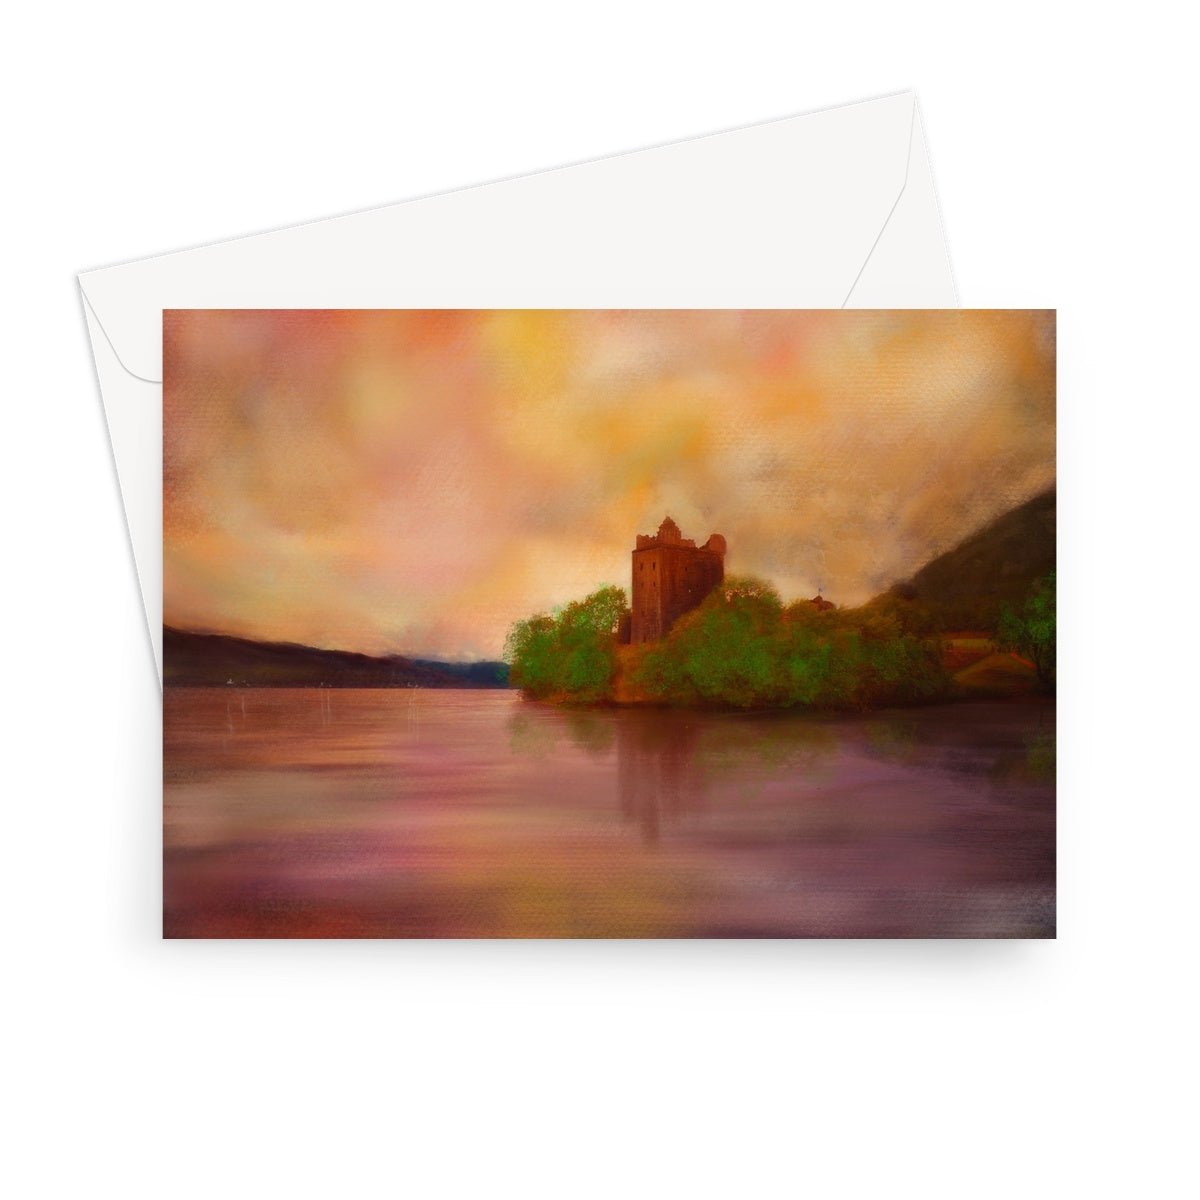 Urquhart Castle Art Gifts Greeting Card-Greetings Cards-Historic & Iconic Scotland Art Gallery-7"x5"-10 Cards-Paintings, Prints, Homeware, Art Gifts From Scotland By Scottish Artist Kevin Hunter